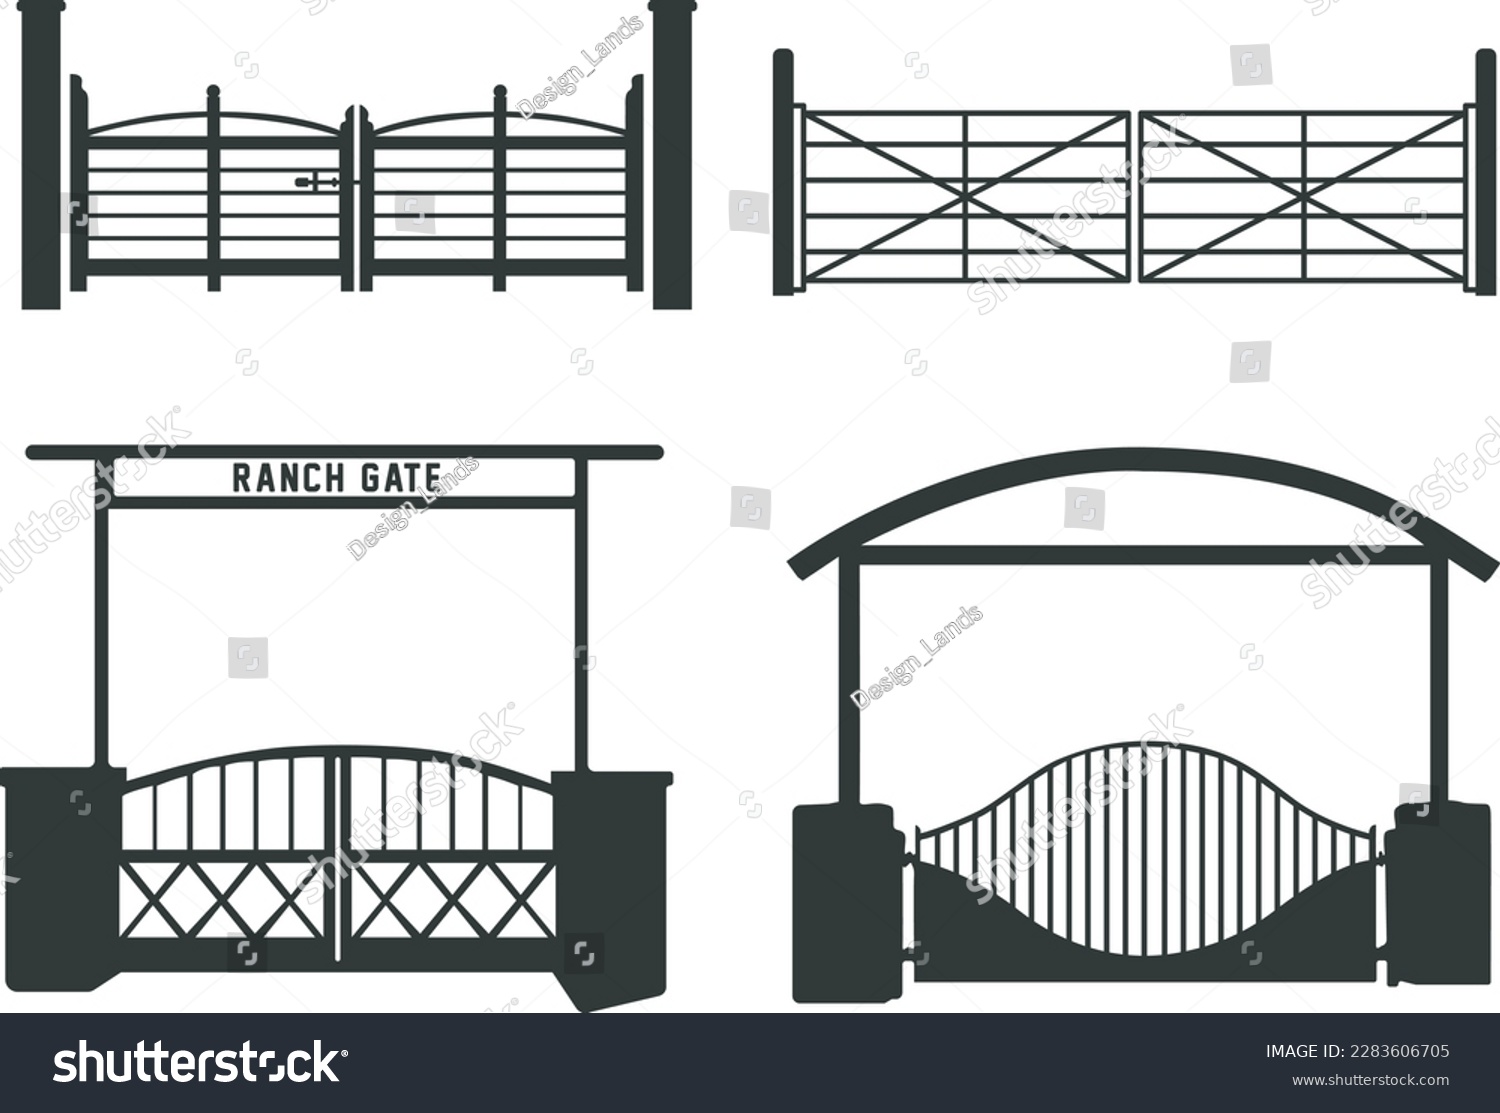 SVG of Ranch gate silhouette, Farm fence silhouette, Ranch gate SVG, Ranch gate illustration svg